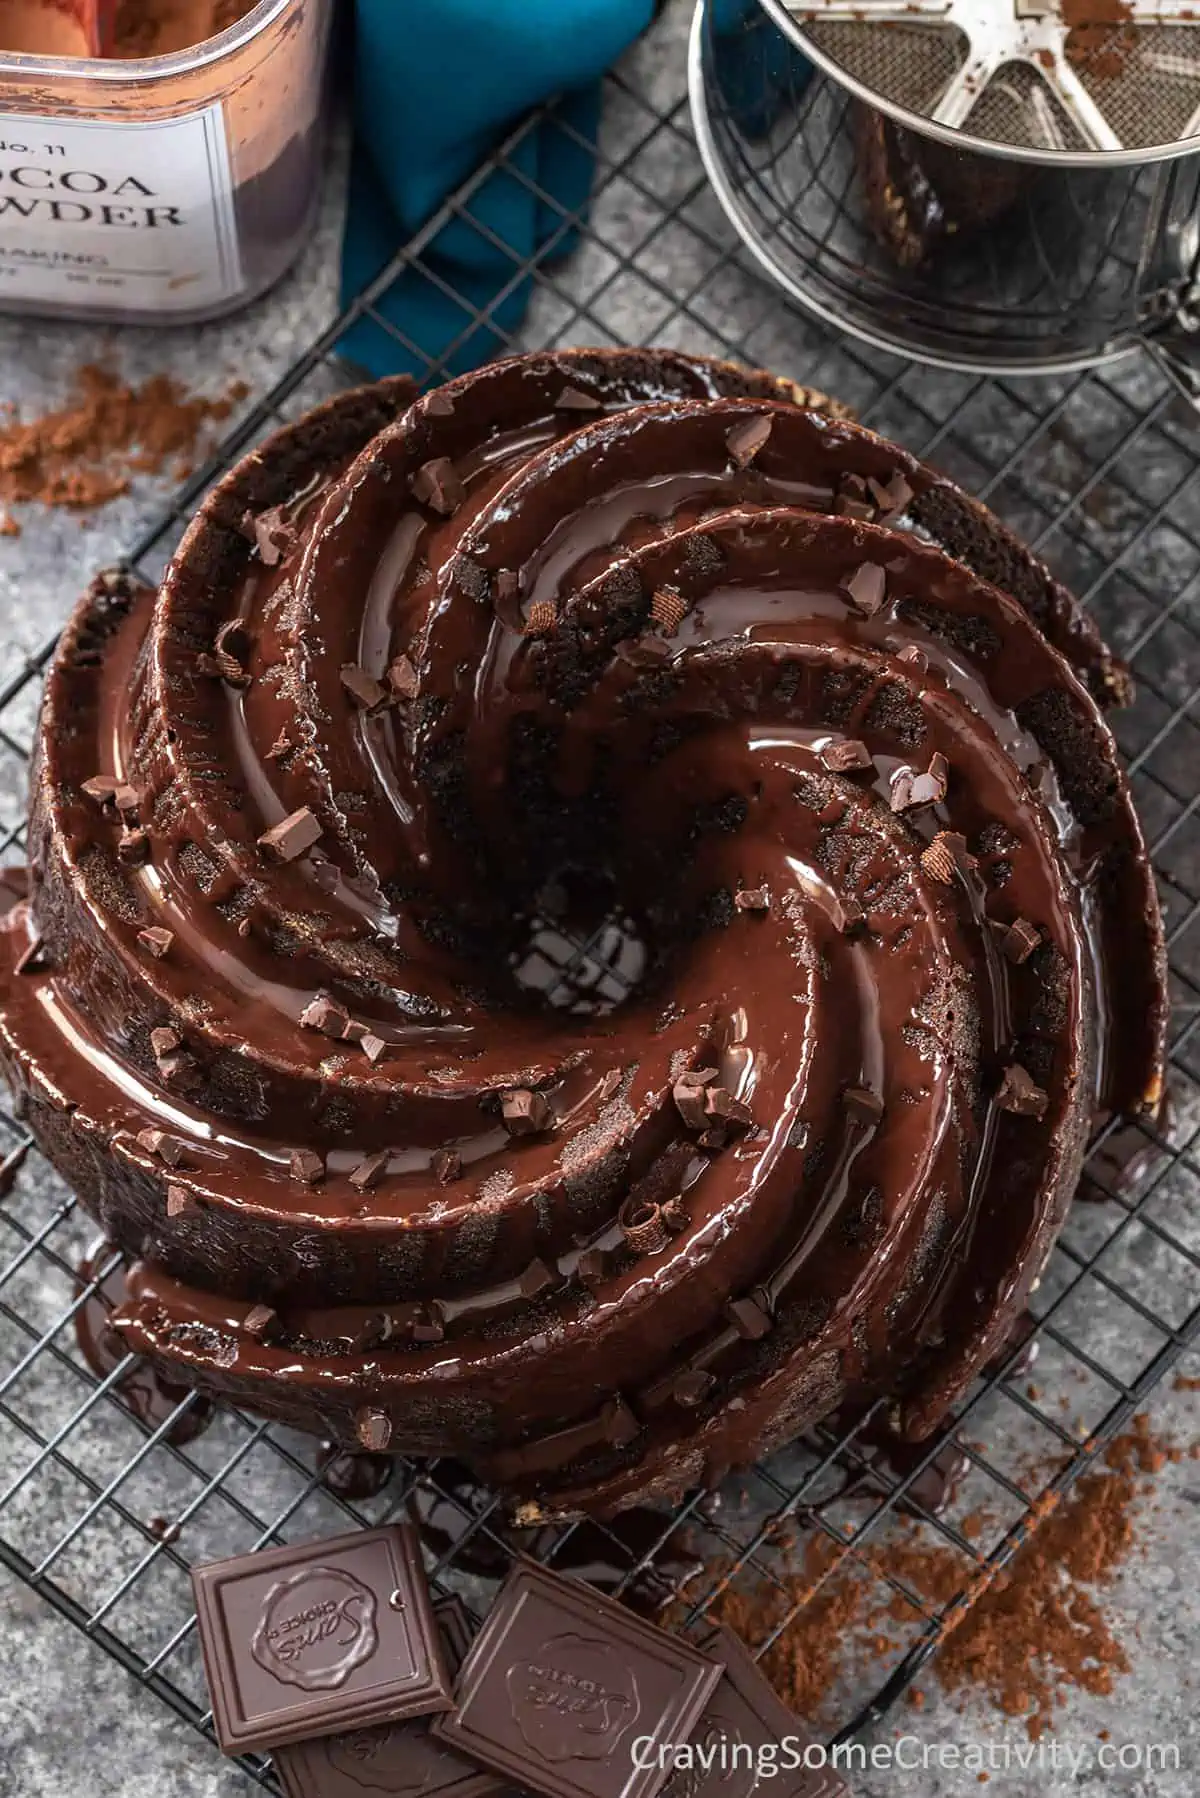 Whole chocolate bundt cake with chocolate ganache drizzle and chocolate flakes on a table to cool.